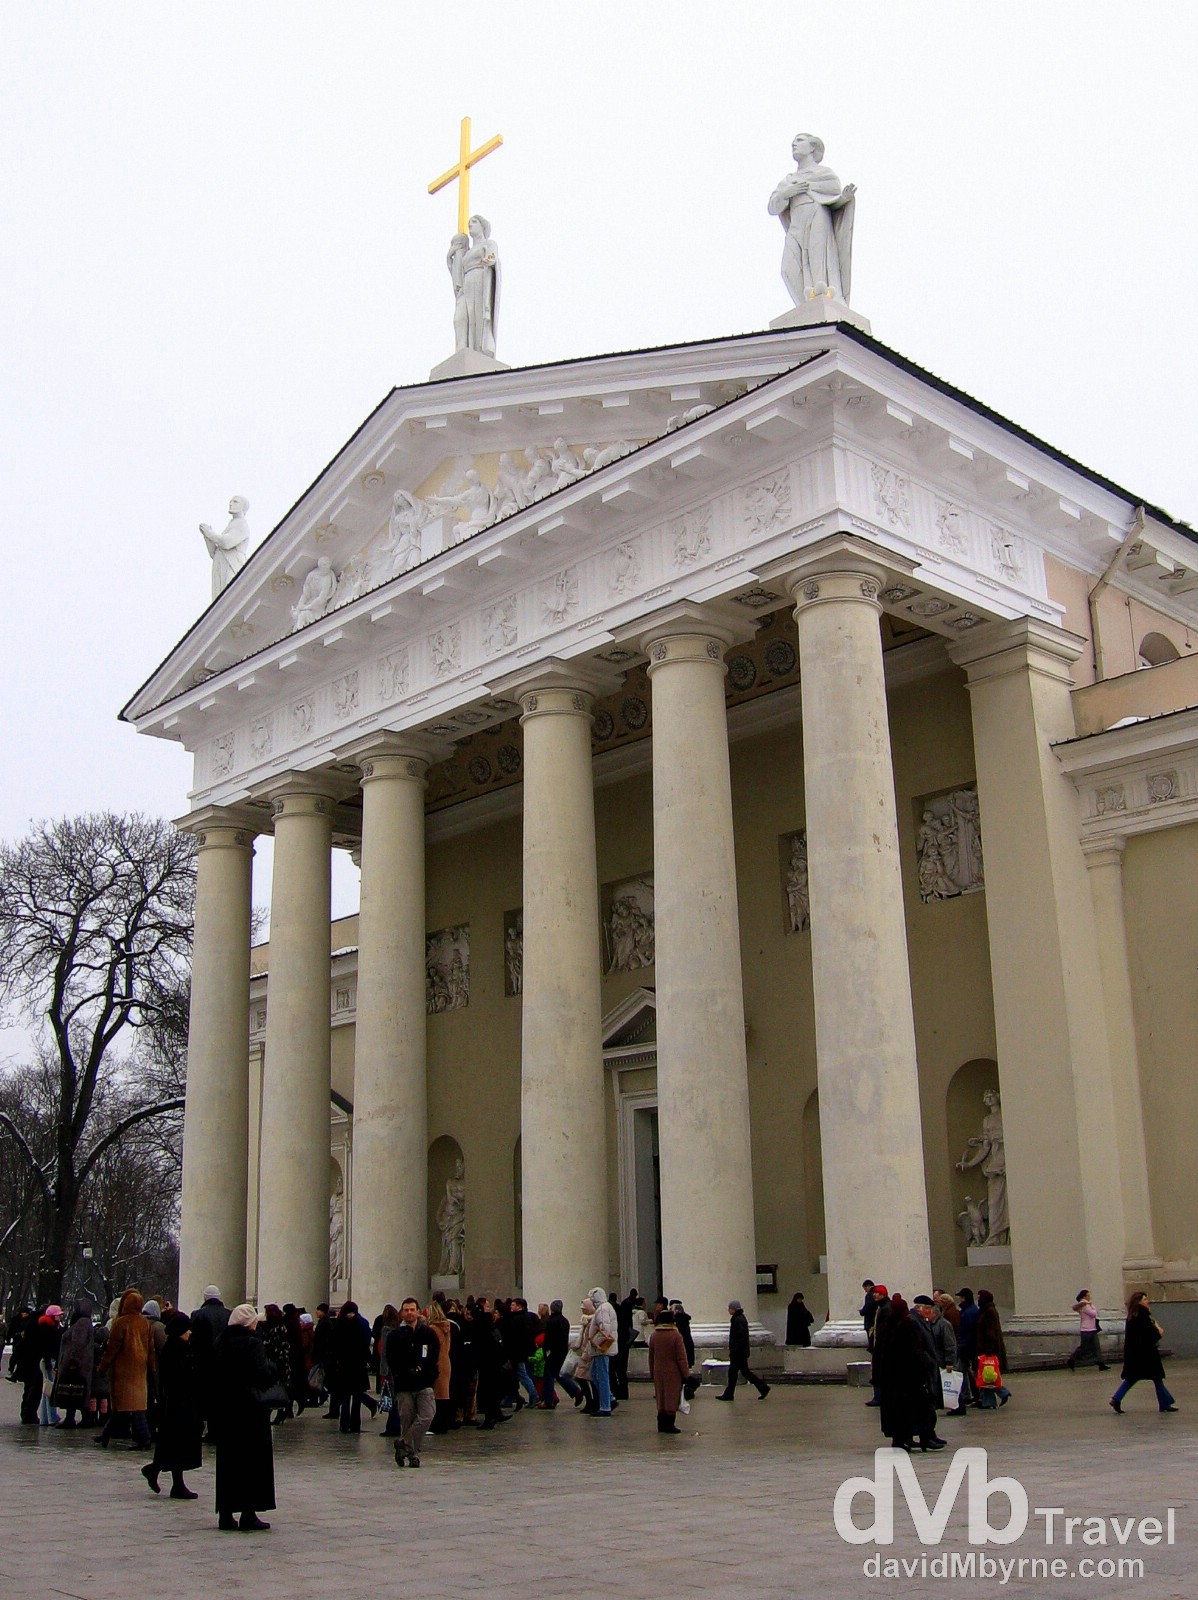 Crowds outside the cathedral in Vilnius, Lithuania. March 4, 2006.